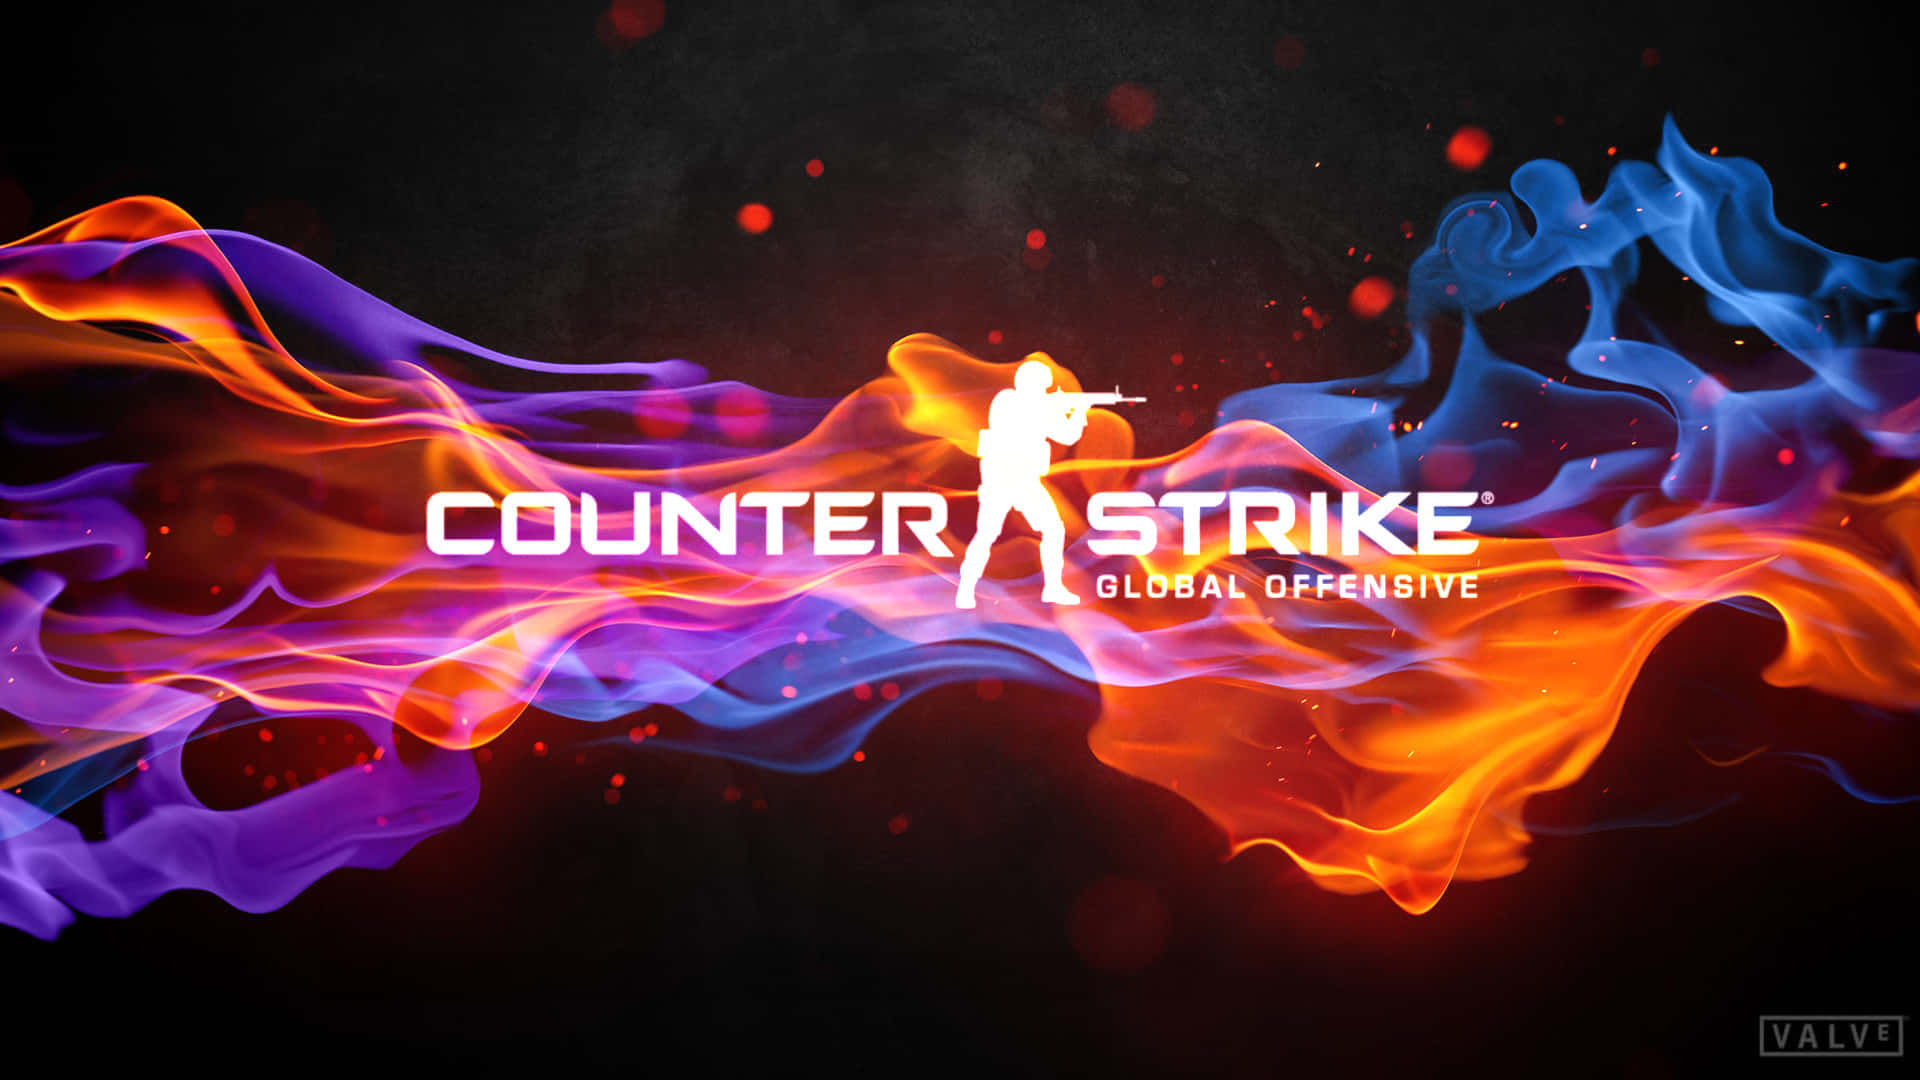 A thrilling Counter-Strike: Global Offensive gaming action captured at 1920x1080 resolution.